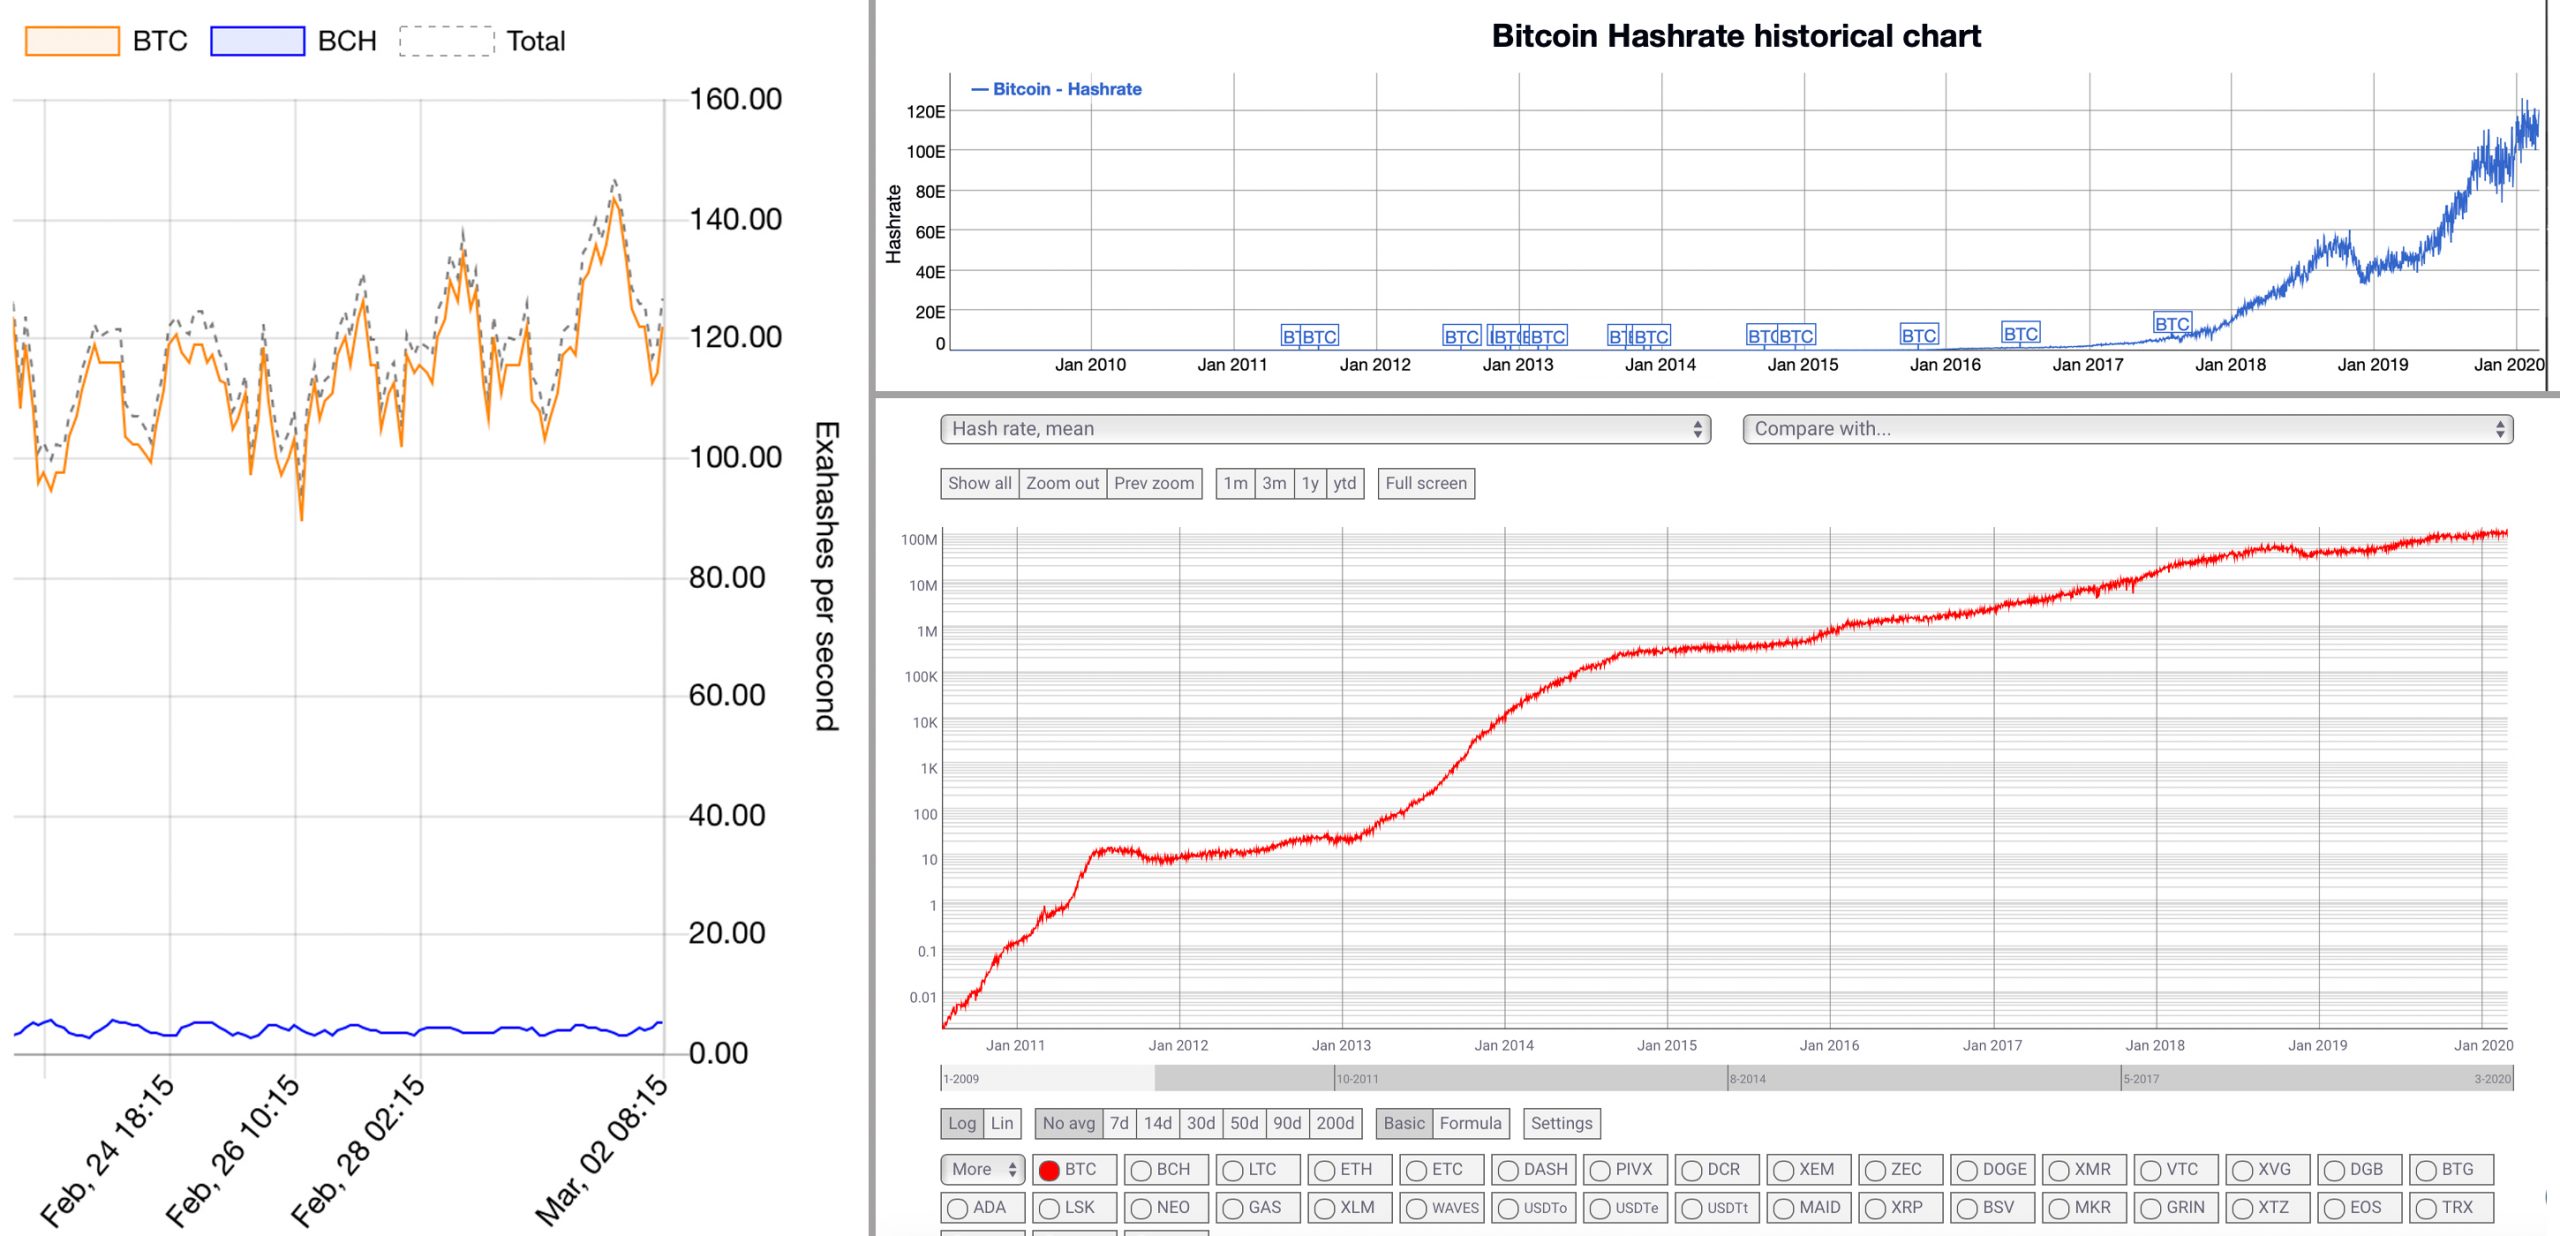 Bitcoin Mining Investment Strong - BTC Hashrate Surpasses All-Time High